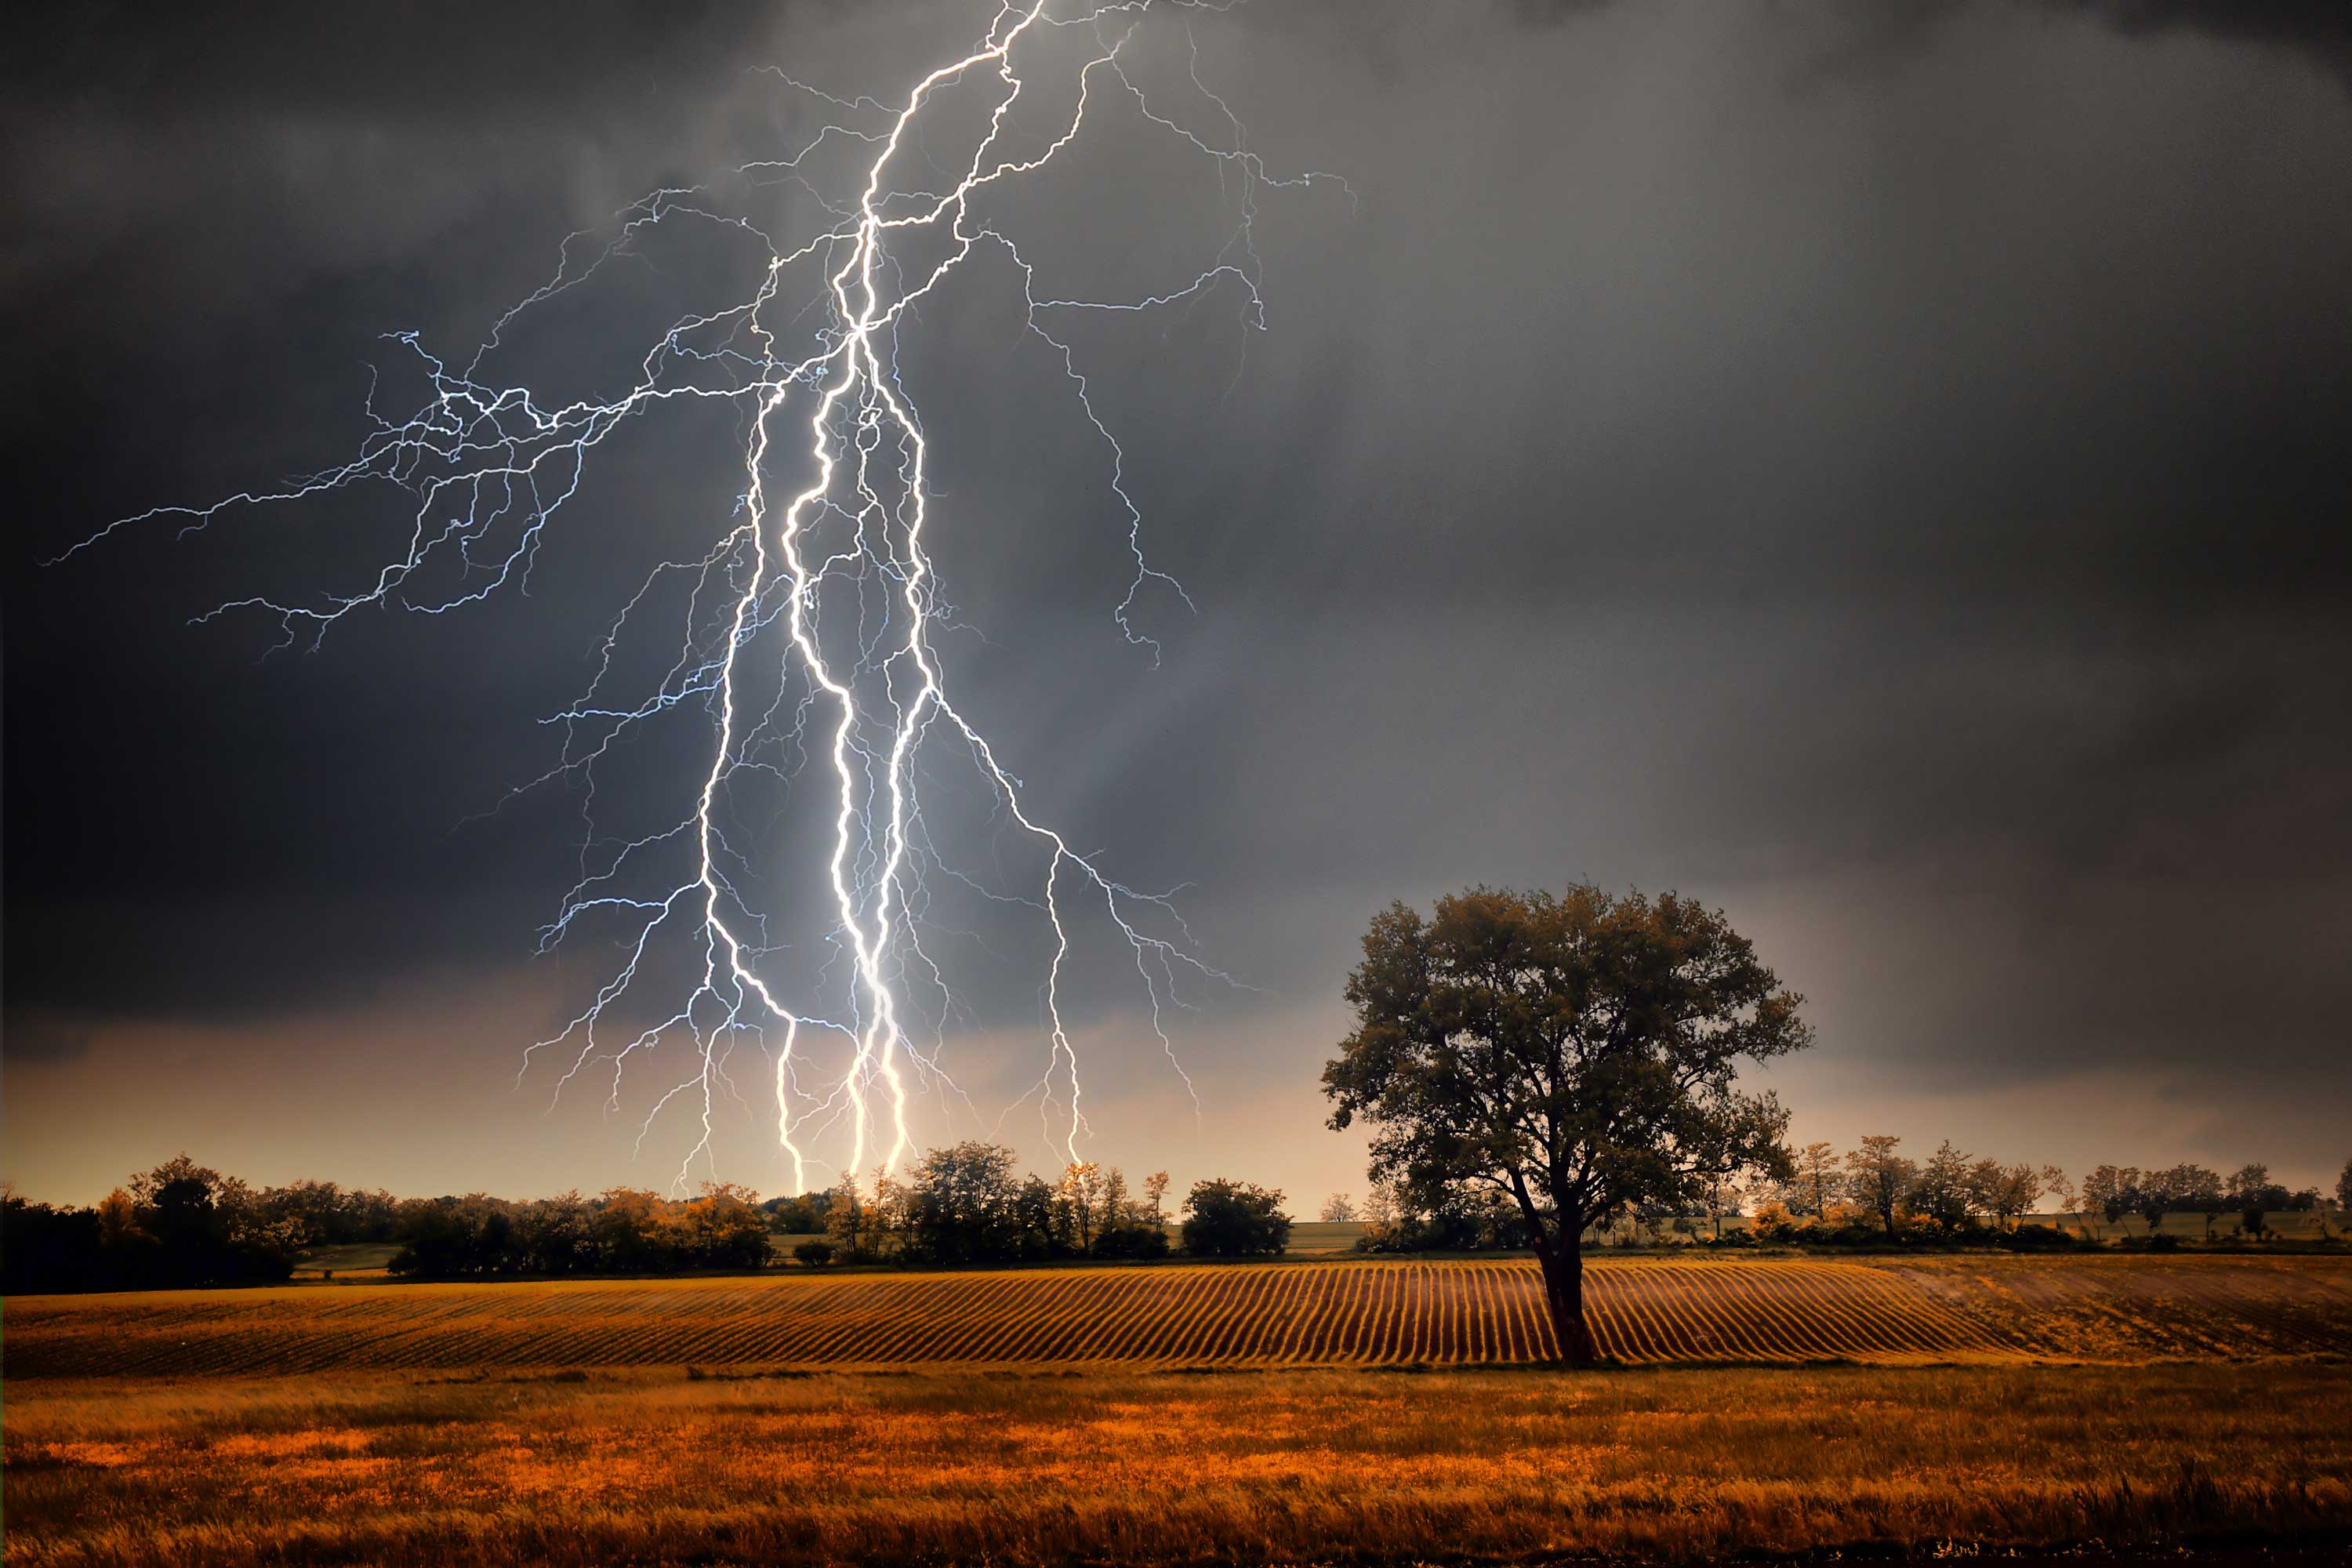 Lightning strikes in an open field with rows of crops.